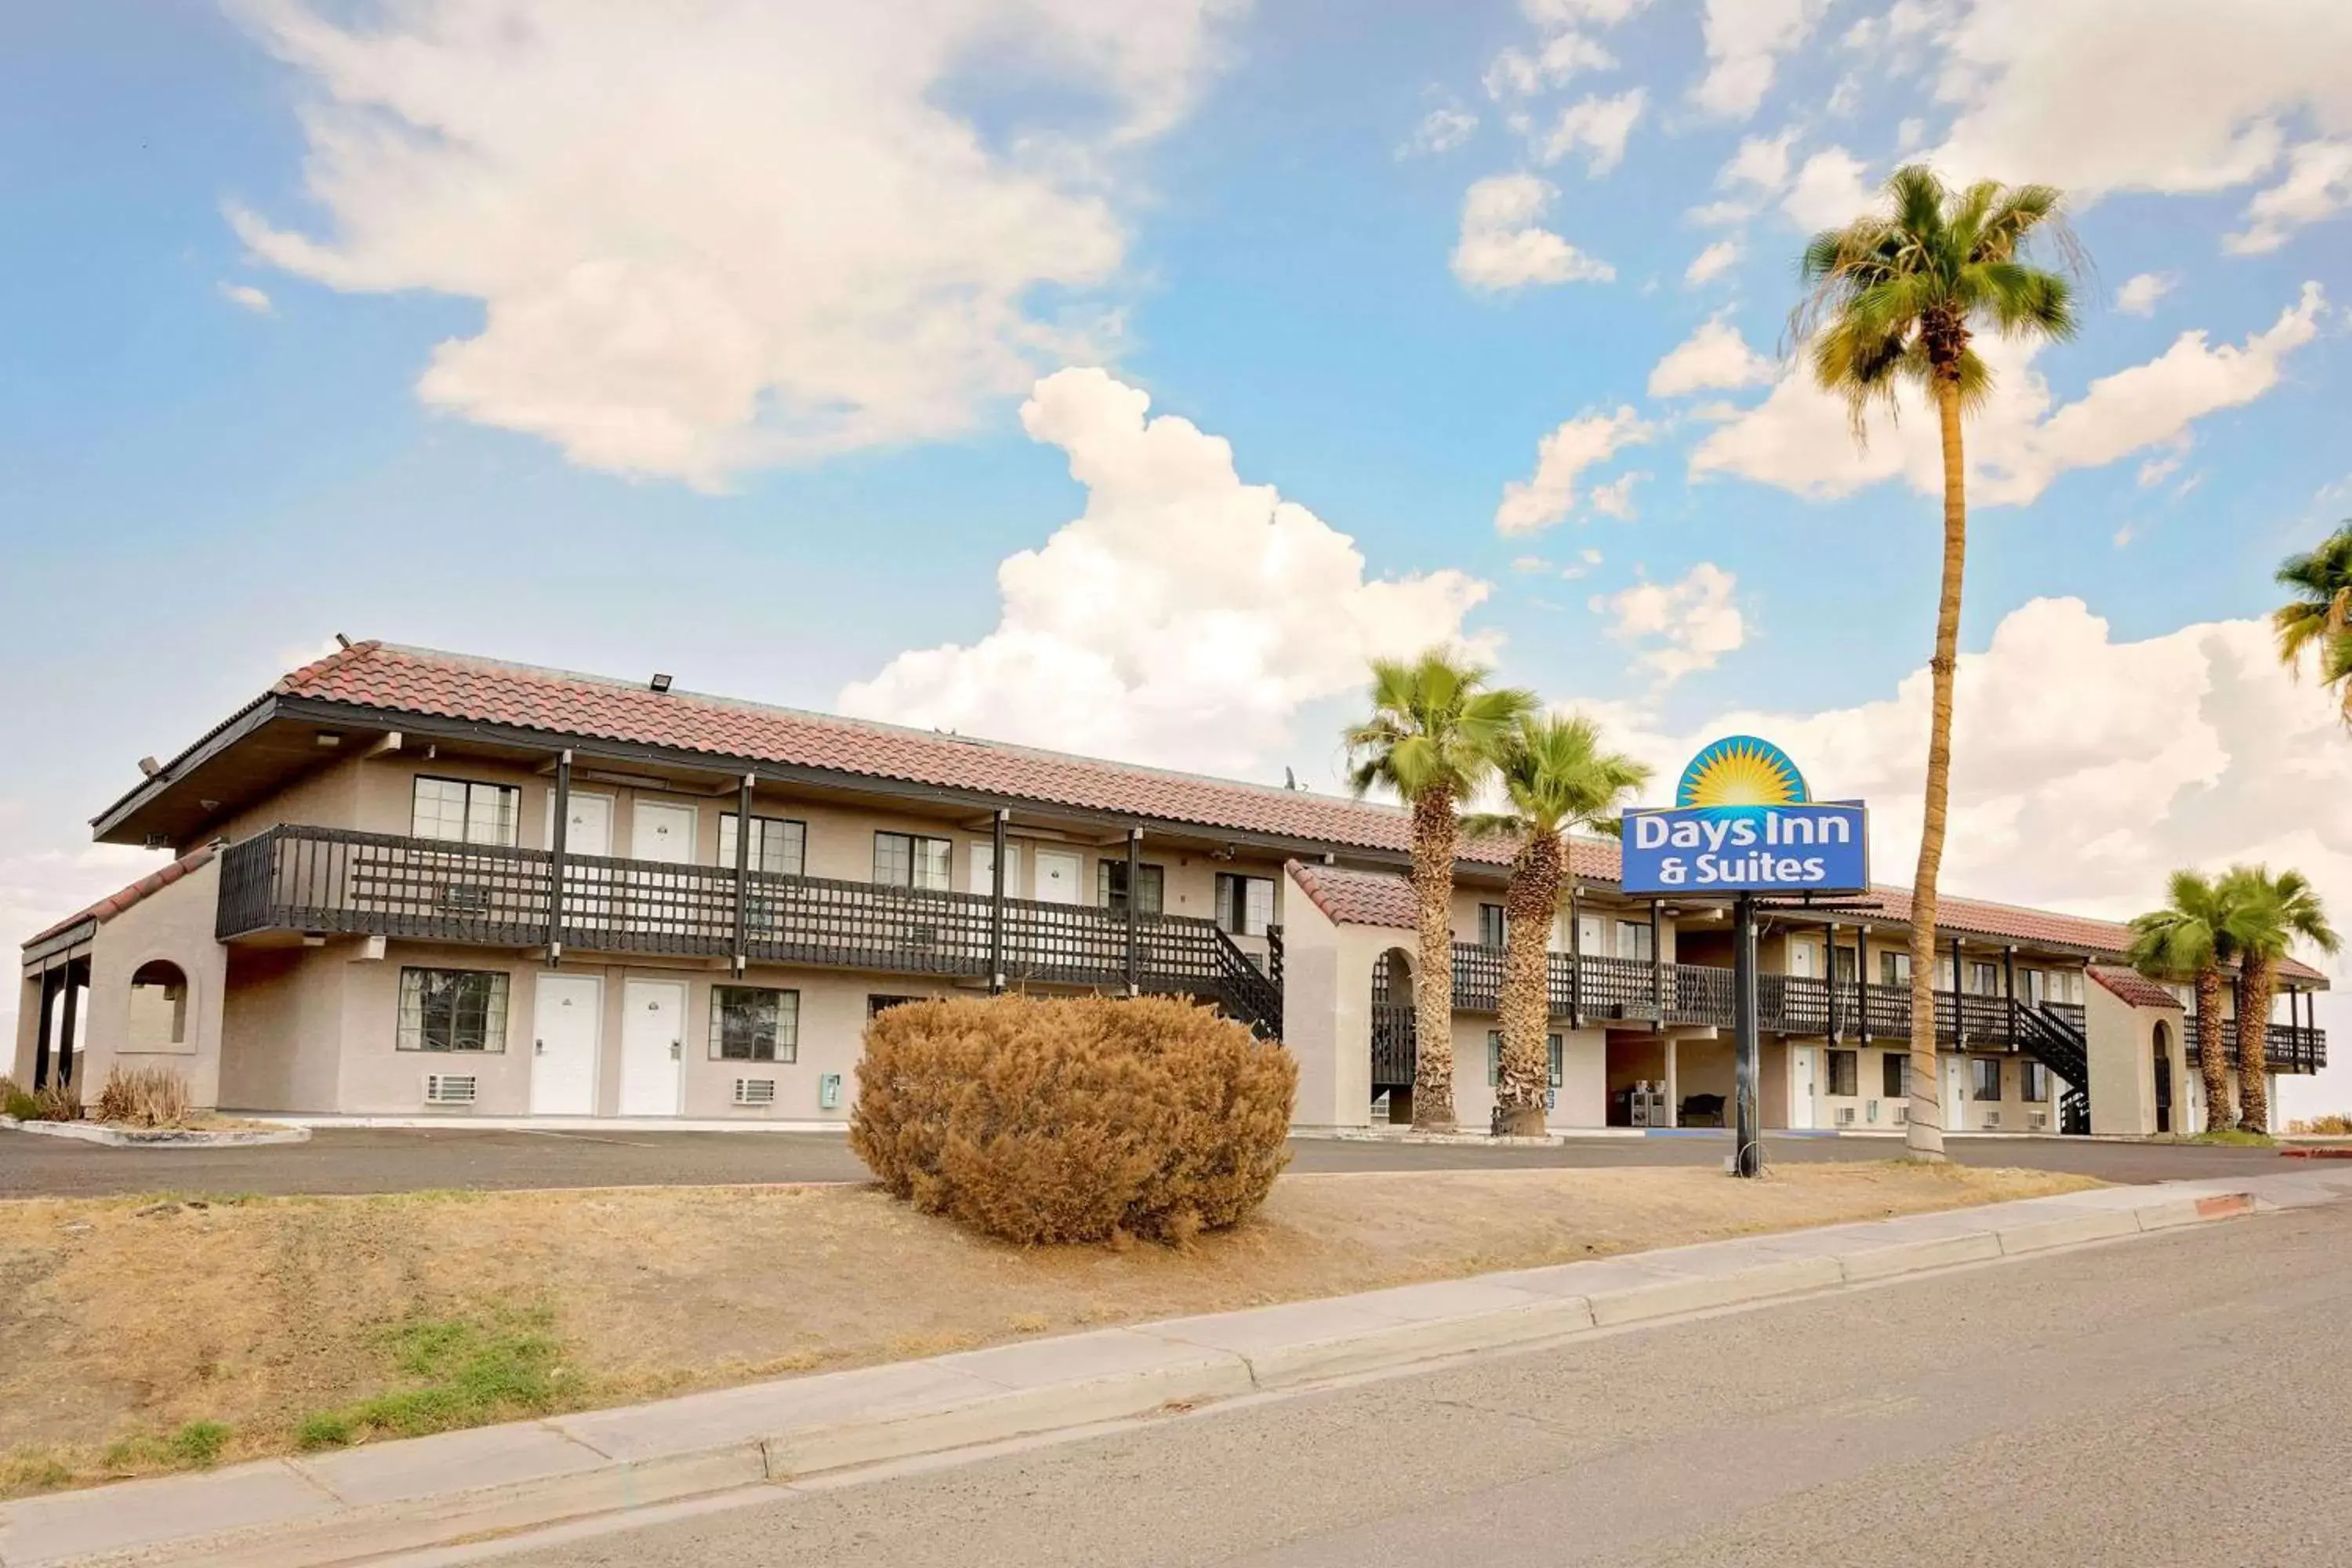 Property Building in Days Inn & Suites by Wyndham Needles